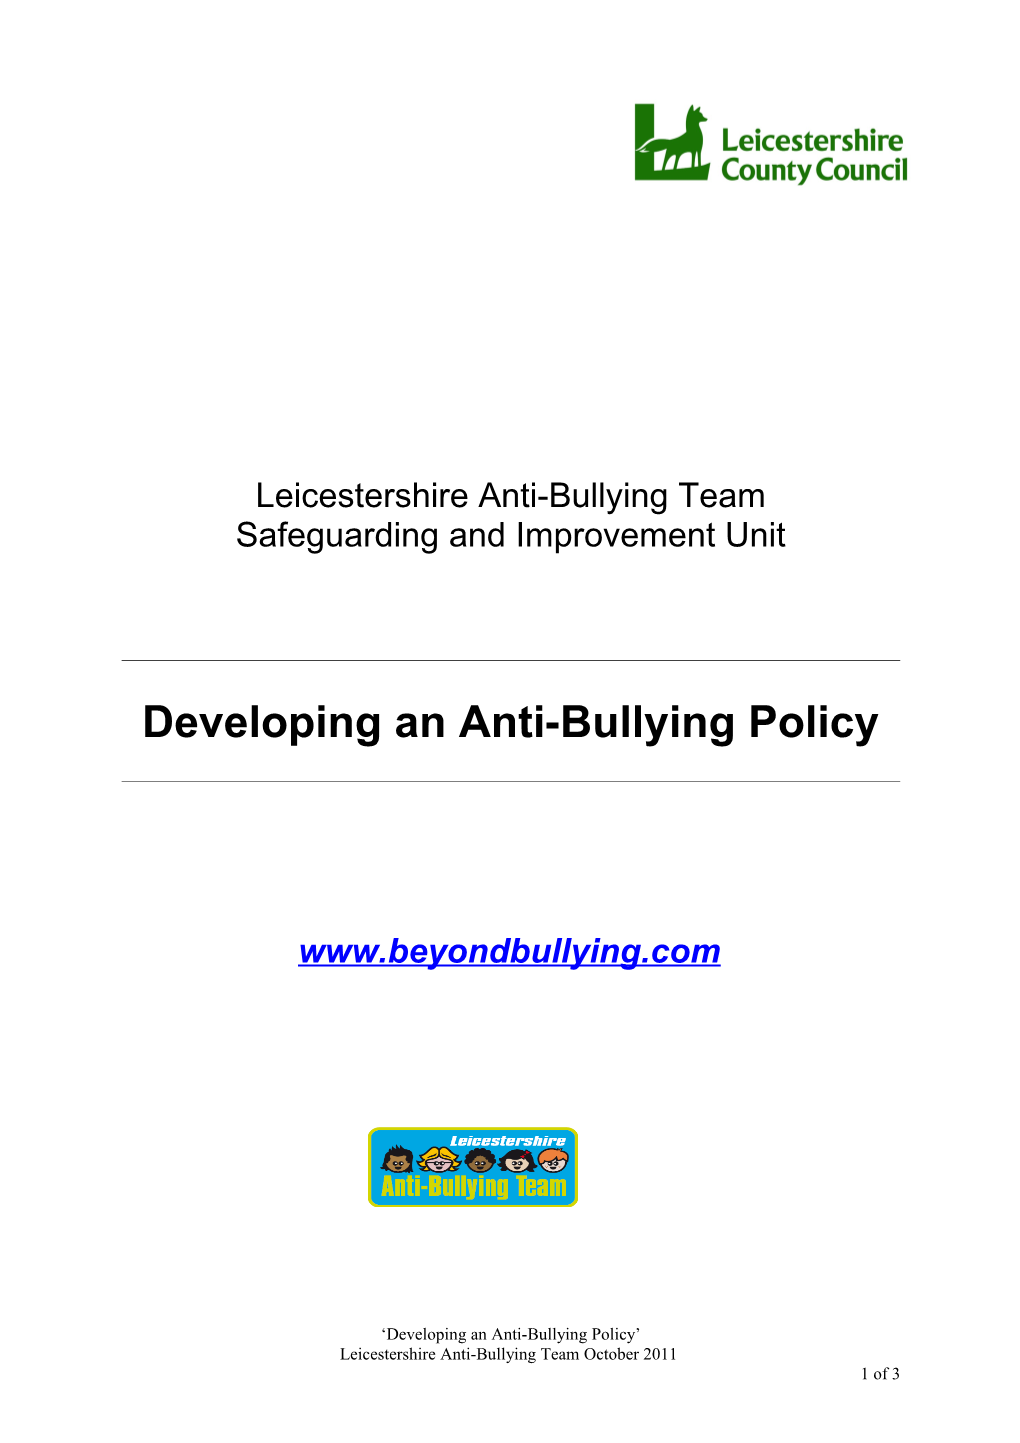 Developing an Anti Bullying Policy